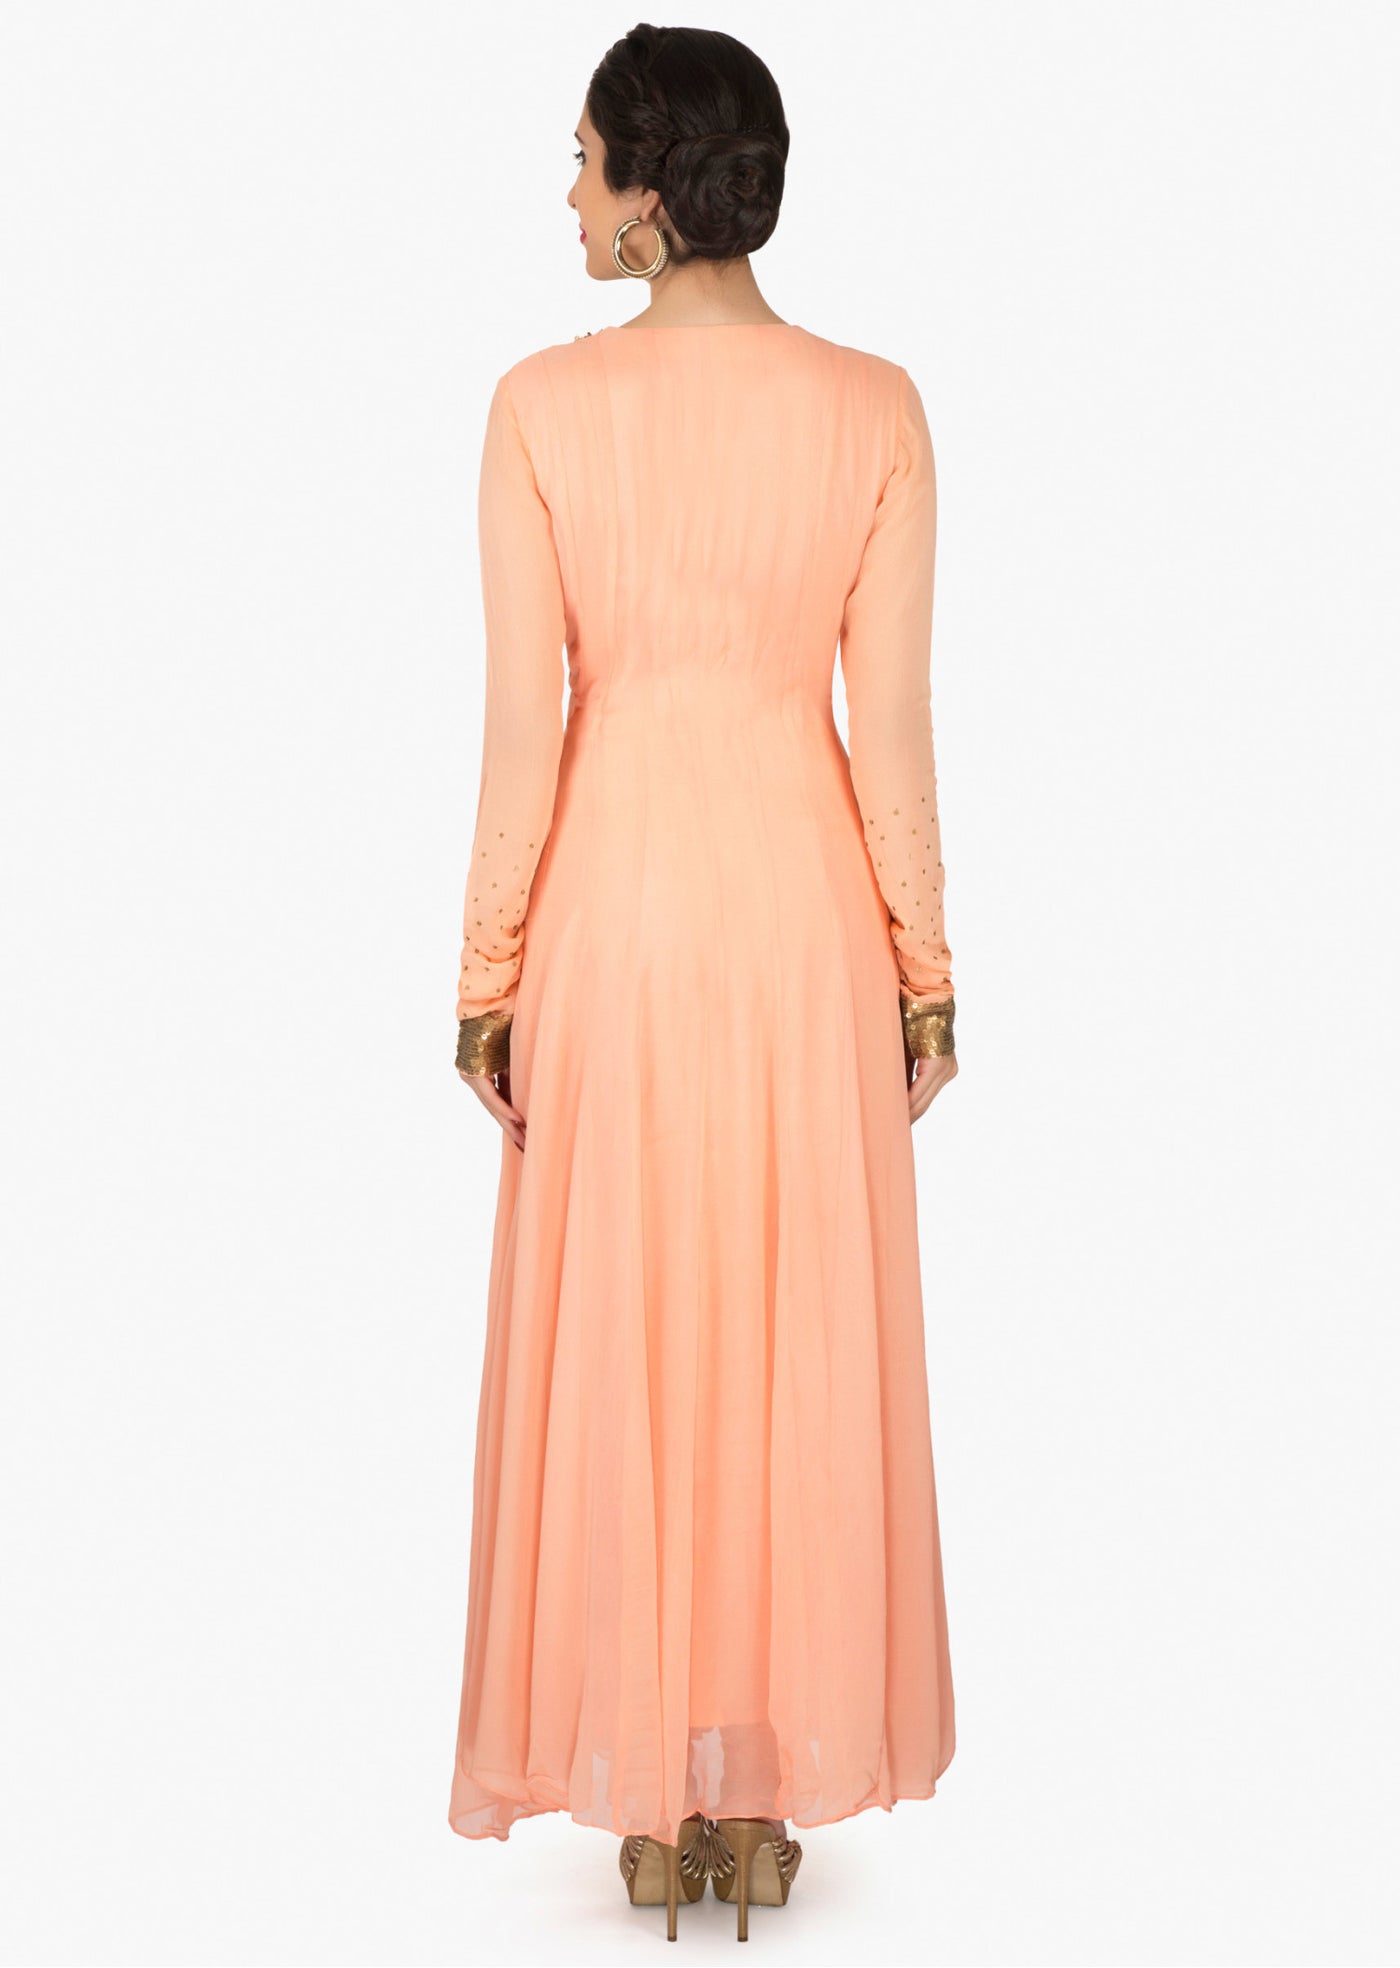 Peach anarkali suit Indian Clothing in Denver, CO, Aurora, CO, Boulder, CO, Fort Collins, CO, Colorado Springs, CO, Parker, CO, Highlands Ranch, CO, Cherry Creek, CO, Centennial, CO, and Longmont, CO. NATIONWIDE SHIPPING USA- India Fashion X